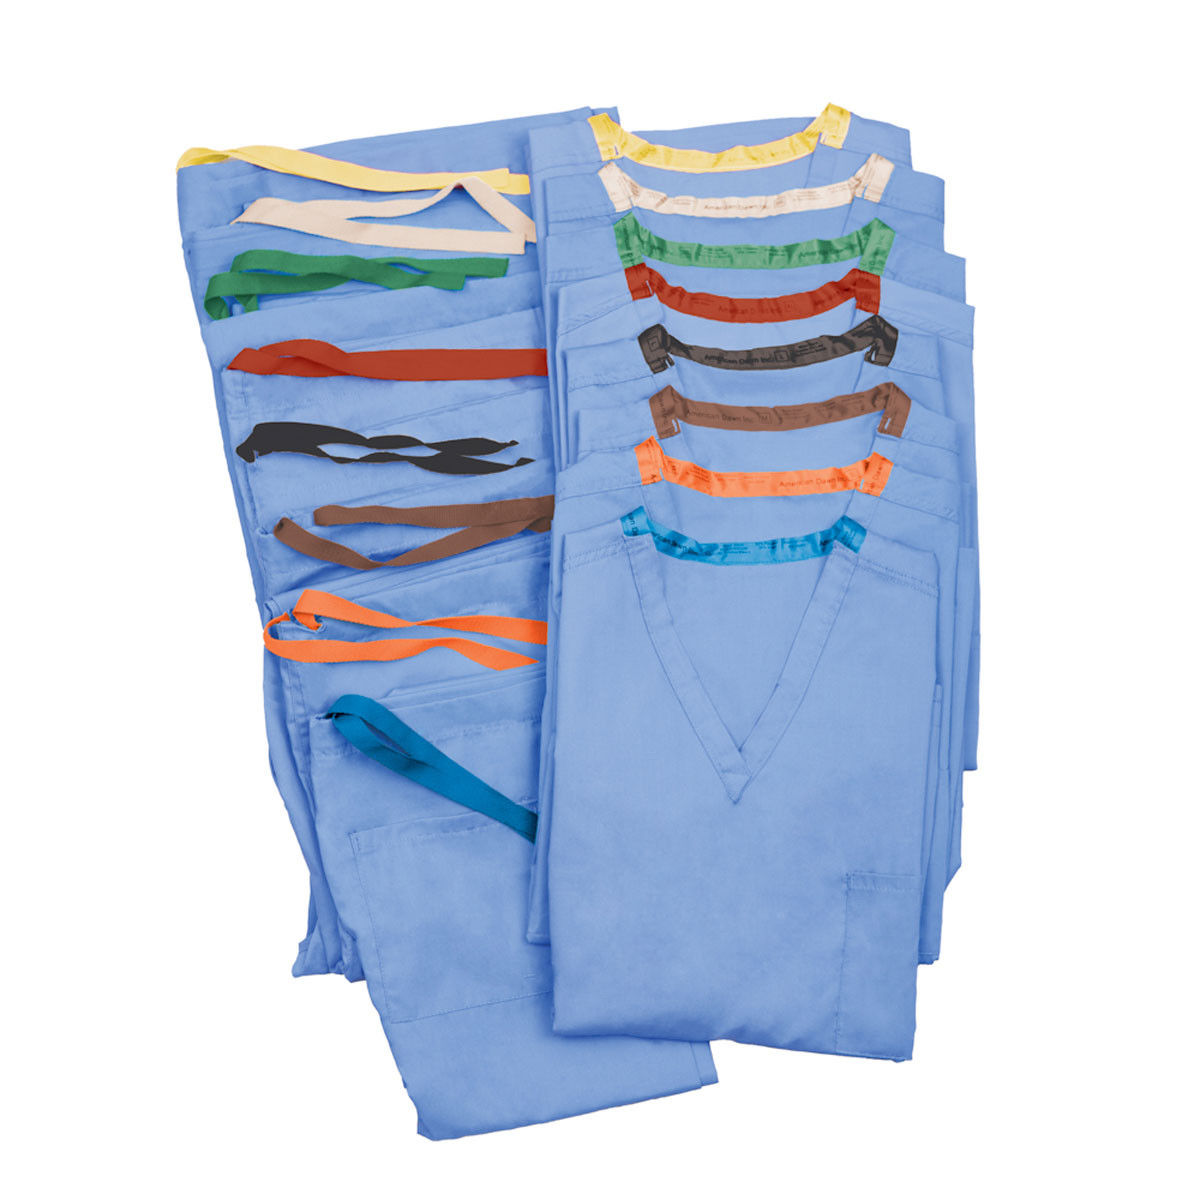 What materials are the T180 Reversible Ceil Blue Scrub Tops and Pants made of?